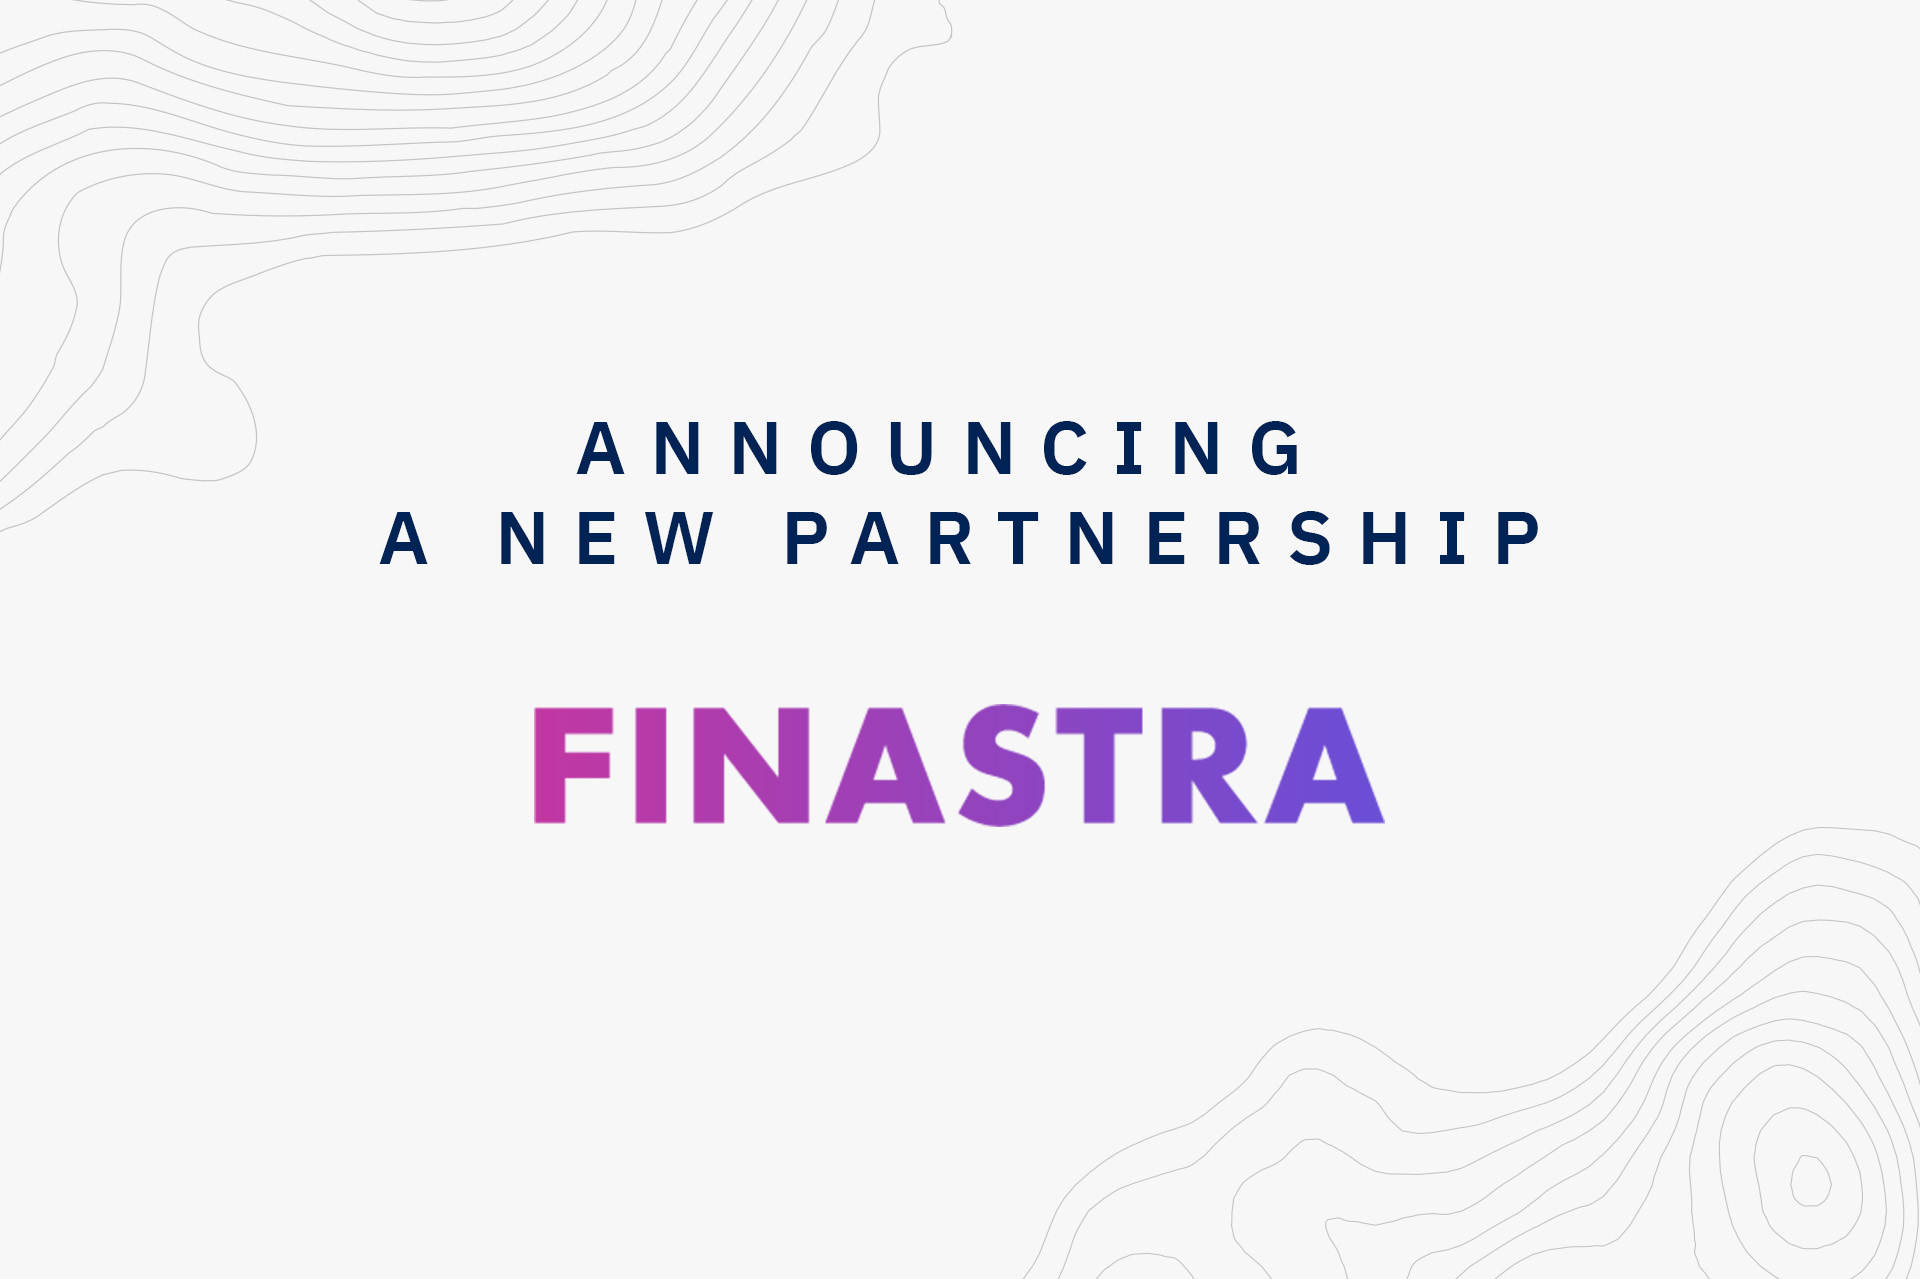 Finastra connects to Contour, offering an enhanced digital trade finance network